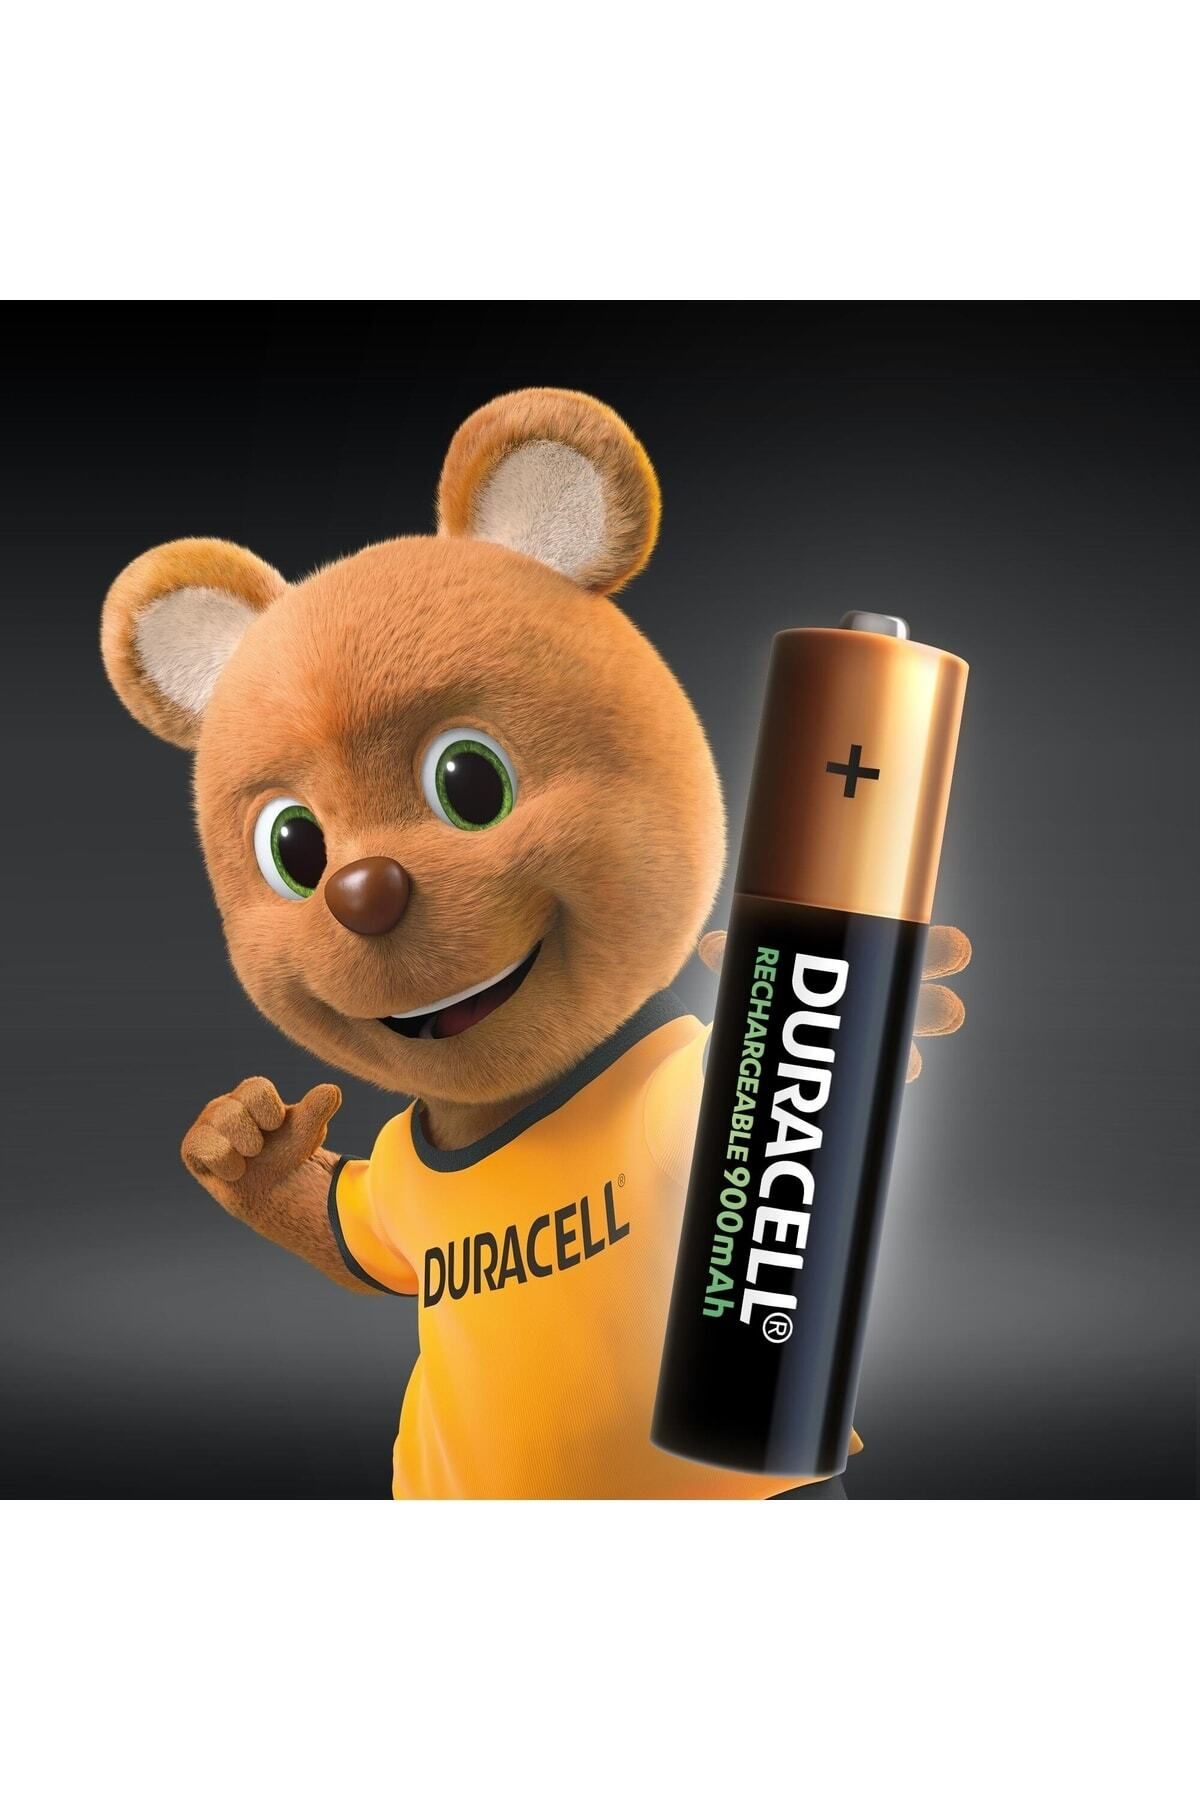 Pilas Aaa Duracell Quantum Blister 2 Unidades Dura Extra 18x